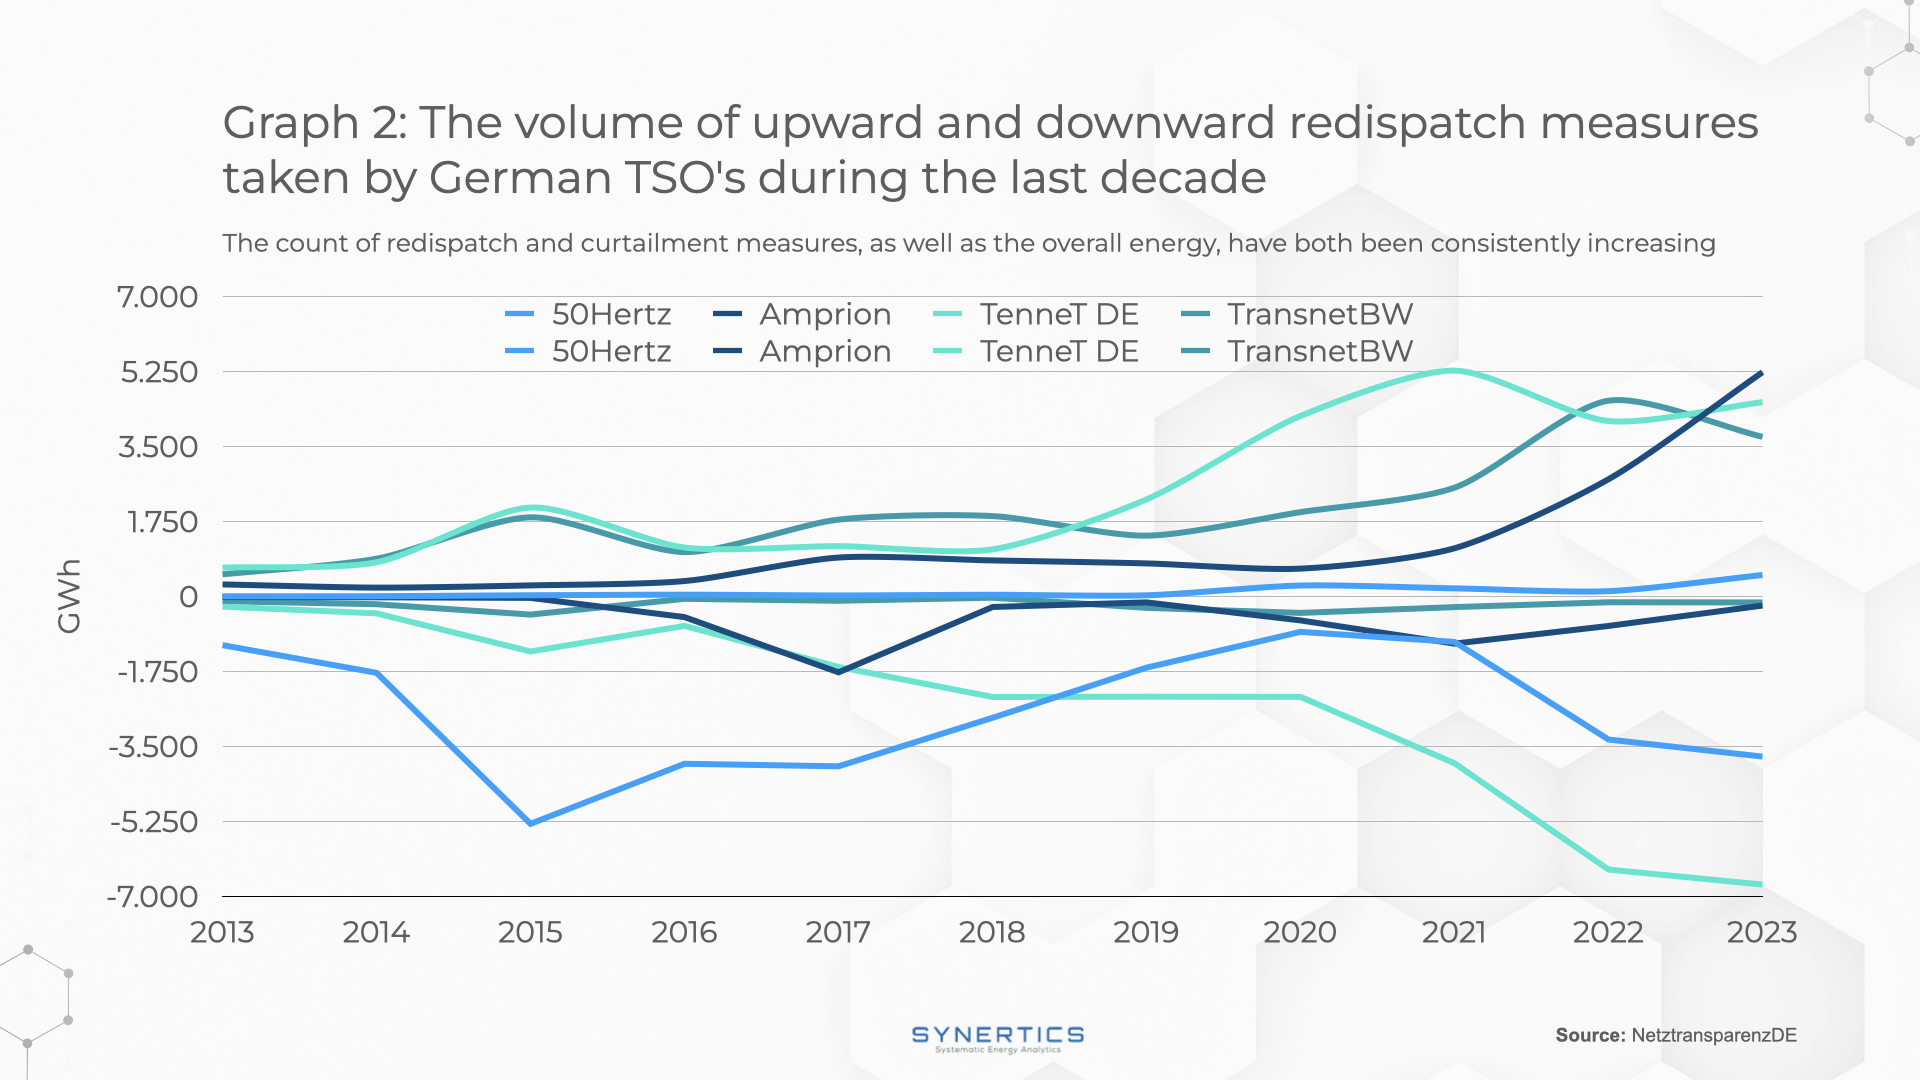 yearly amount of GWh of requests by German TSOs during the last decade